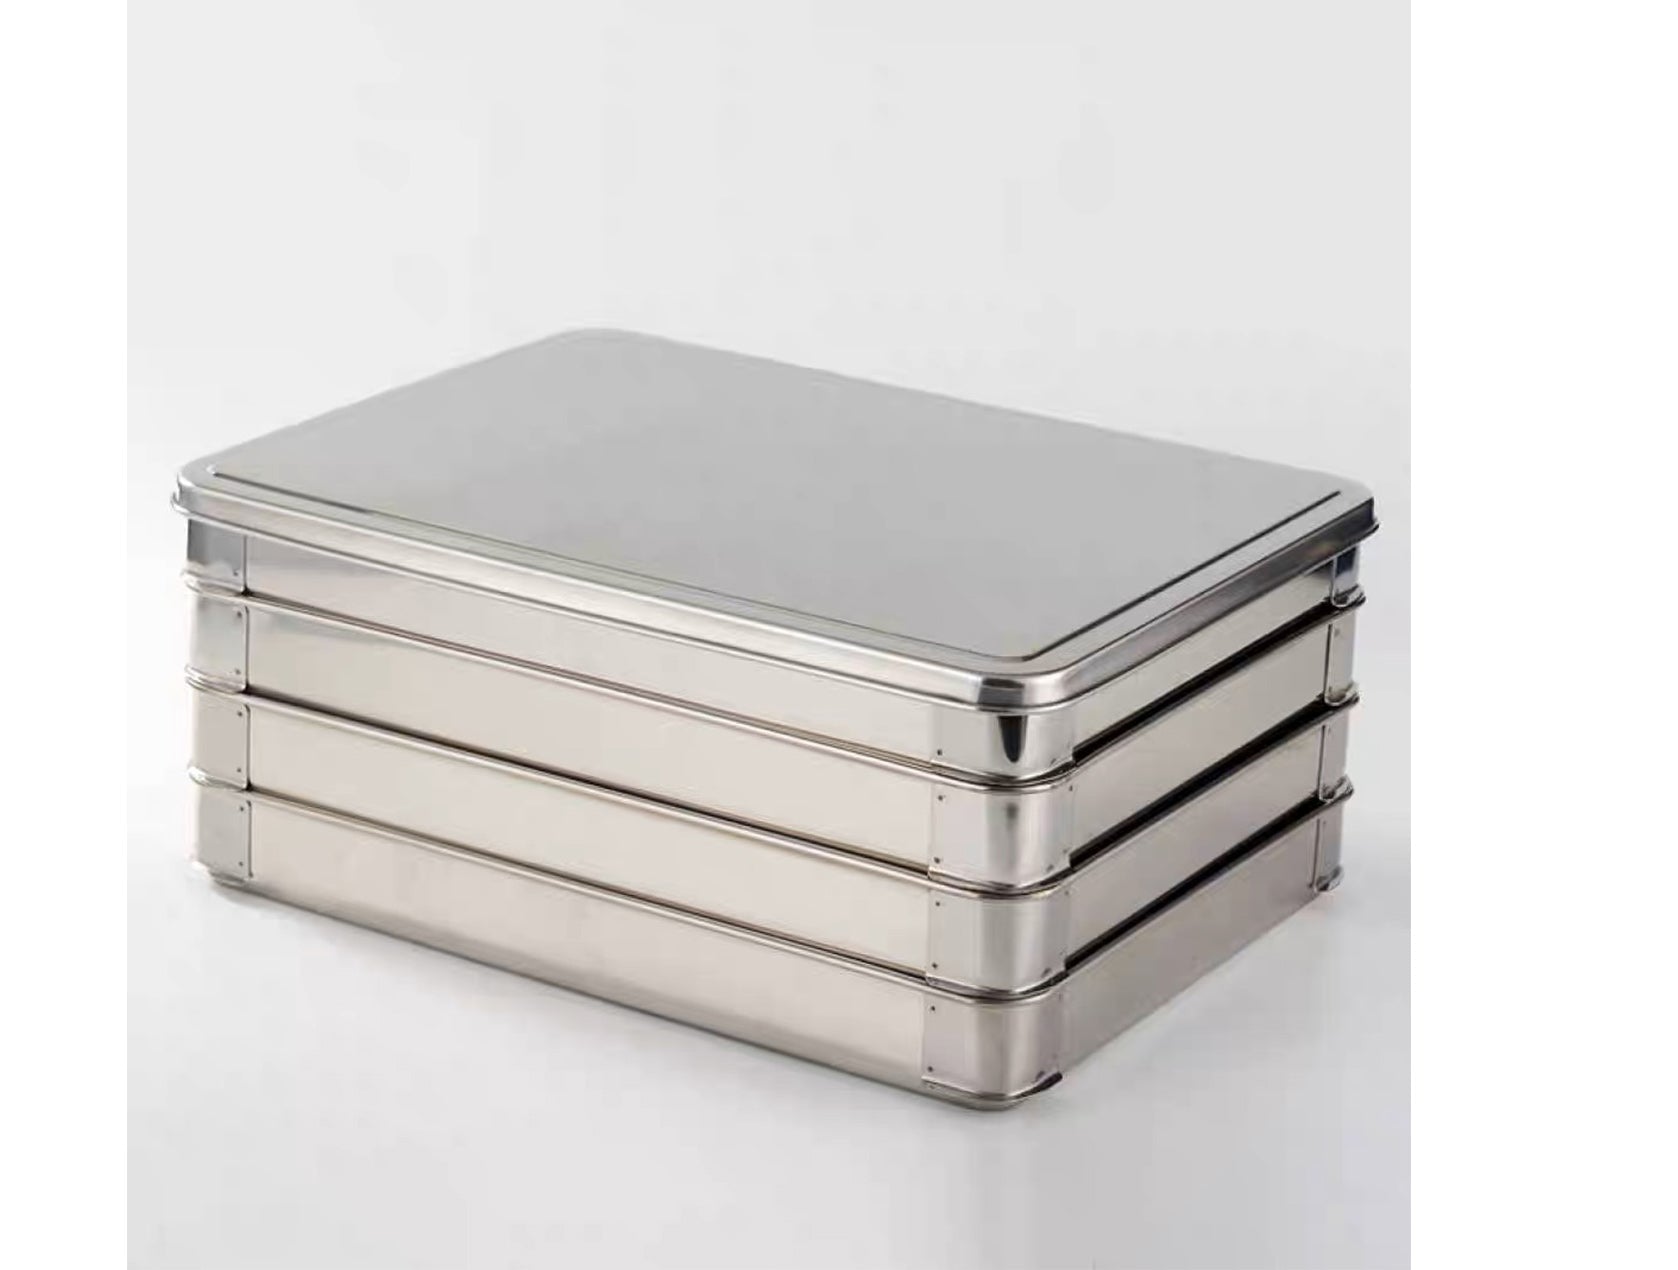 Buy Luxury serving dishes stainless steel 26,5x19,5x3,5 cm online -  HorecaTraders